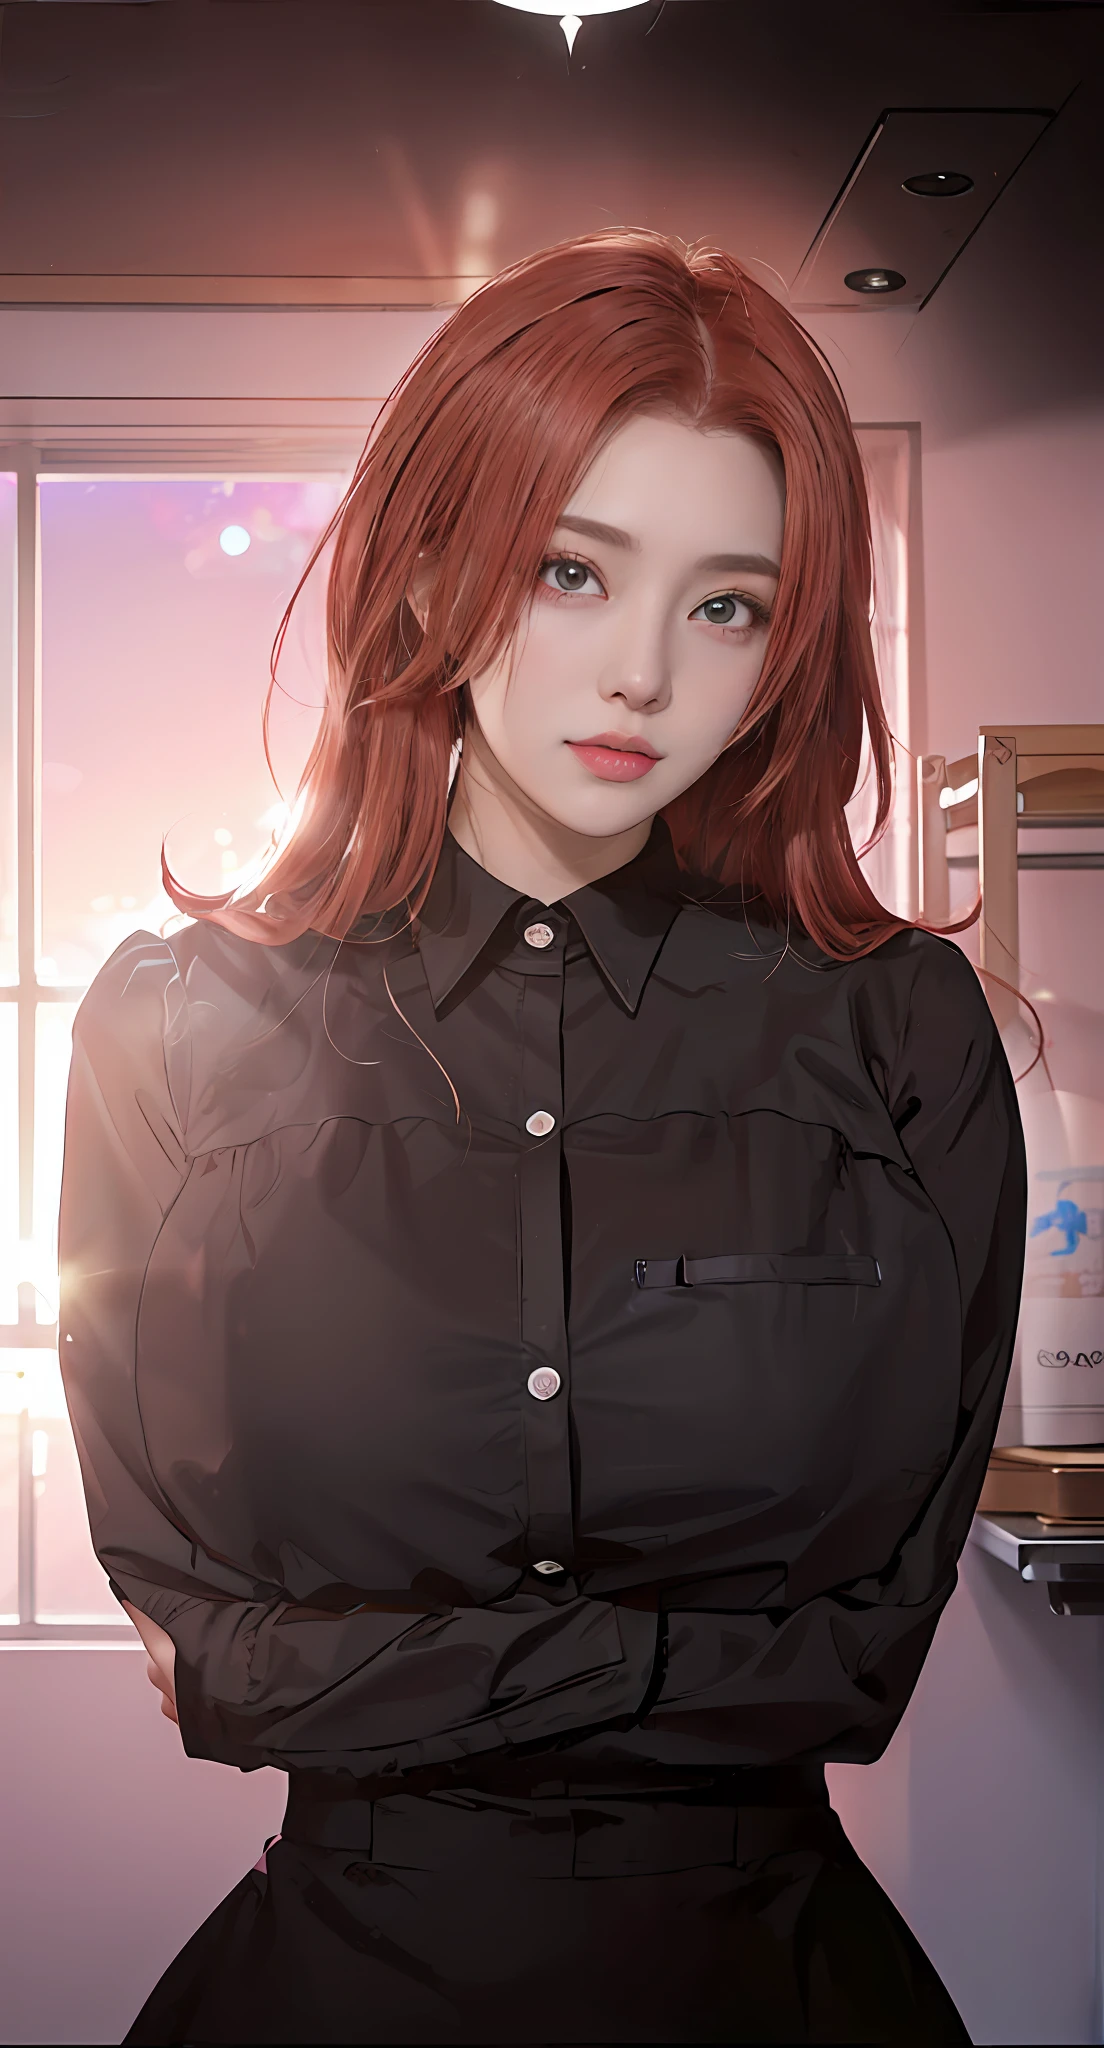 anime girl with red hair and black shirt standing in front of a window, anya from spy x family, marin kitagawa fanart, fine details. girls frontline, anime girl wearing a black dress, from girls frontline, hinata hyuga, anime visual of a young woman, seductive anime girl, realistic , (sfw) safe for work, yayoi kasuma